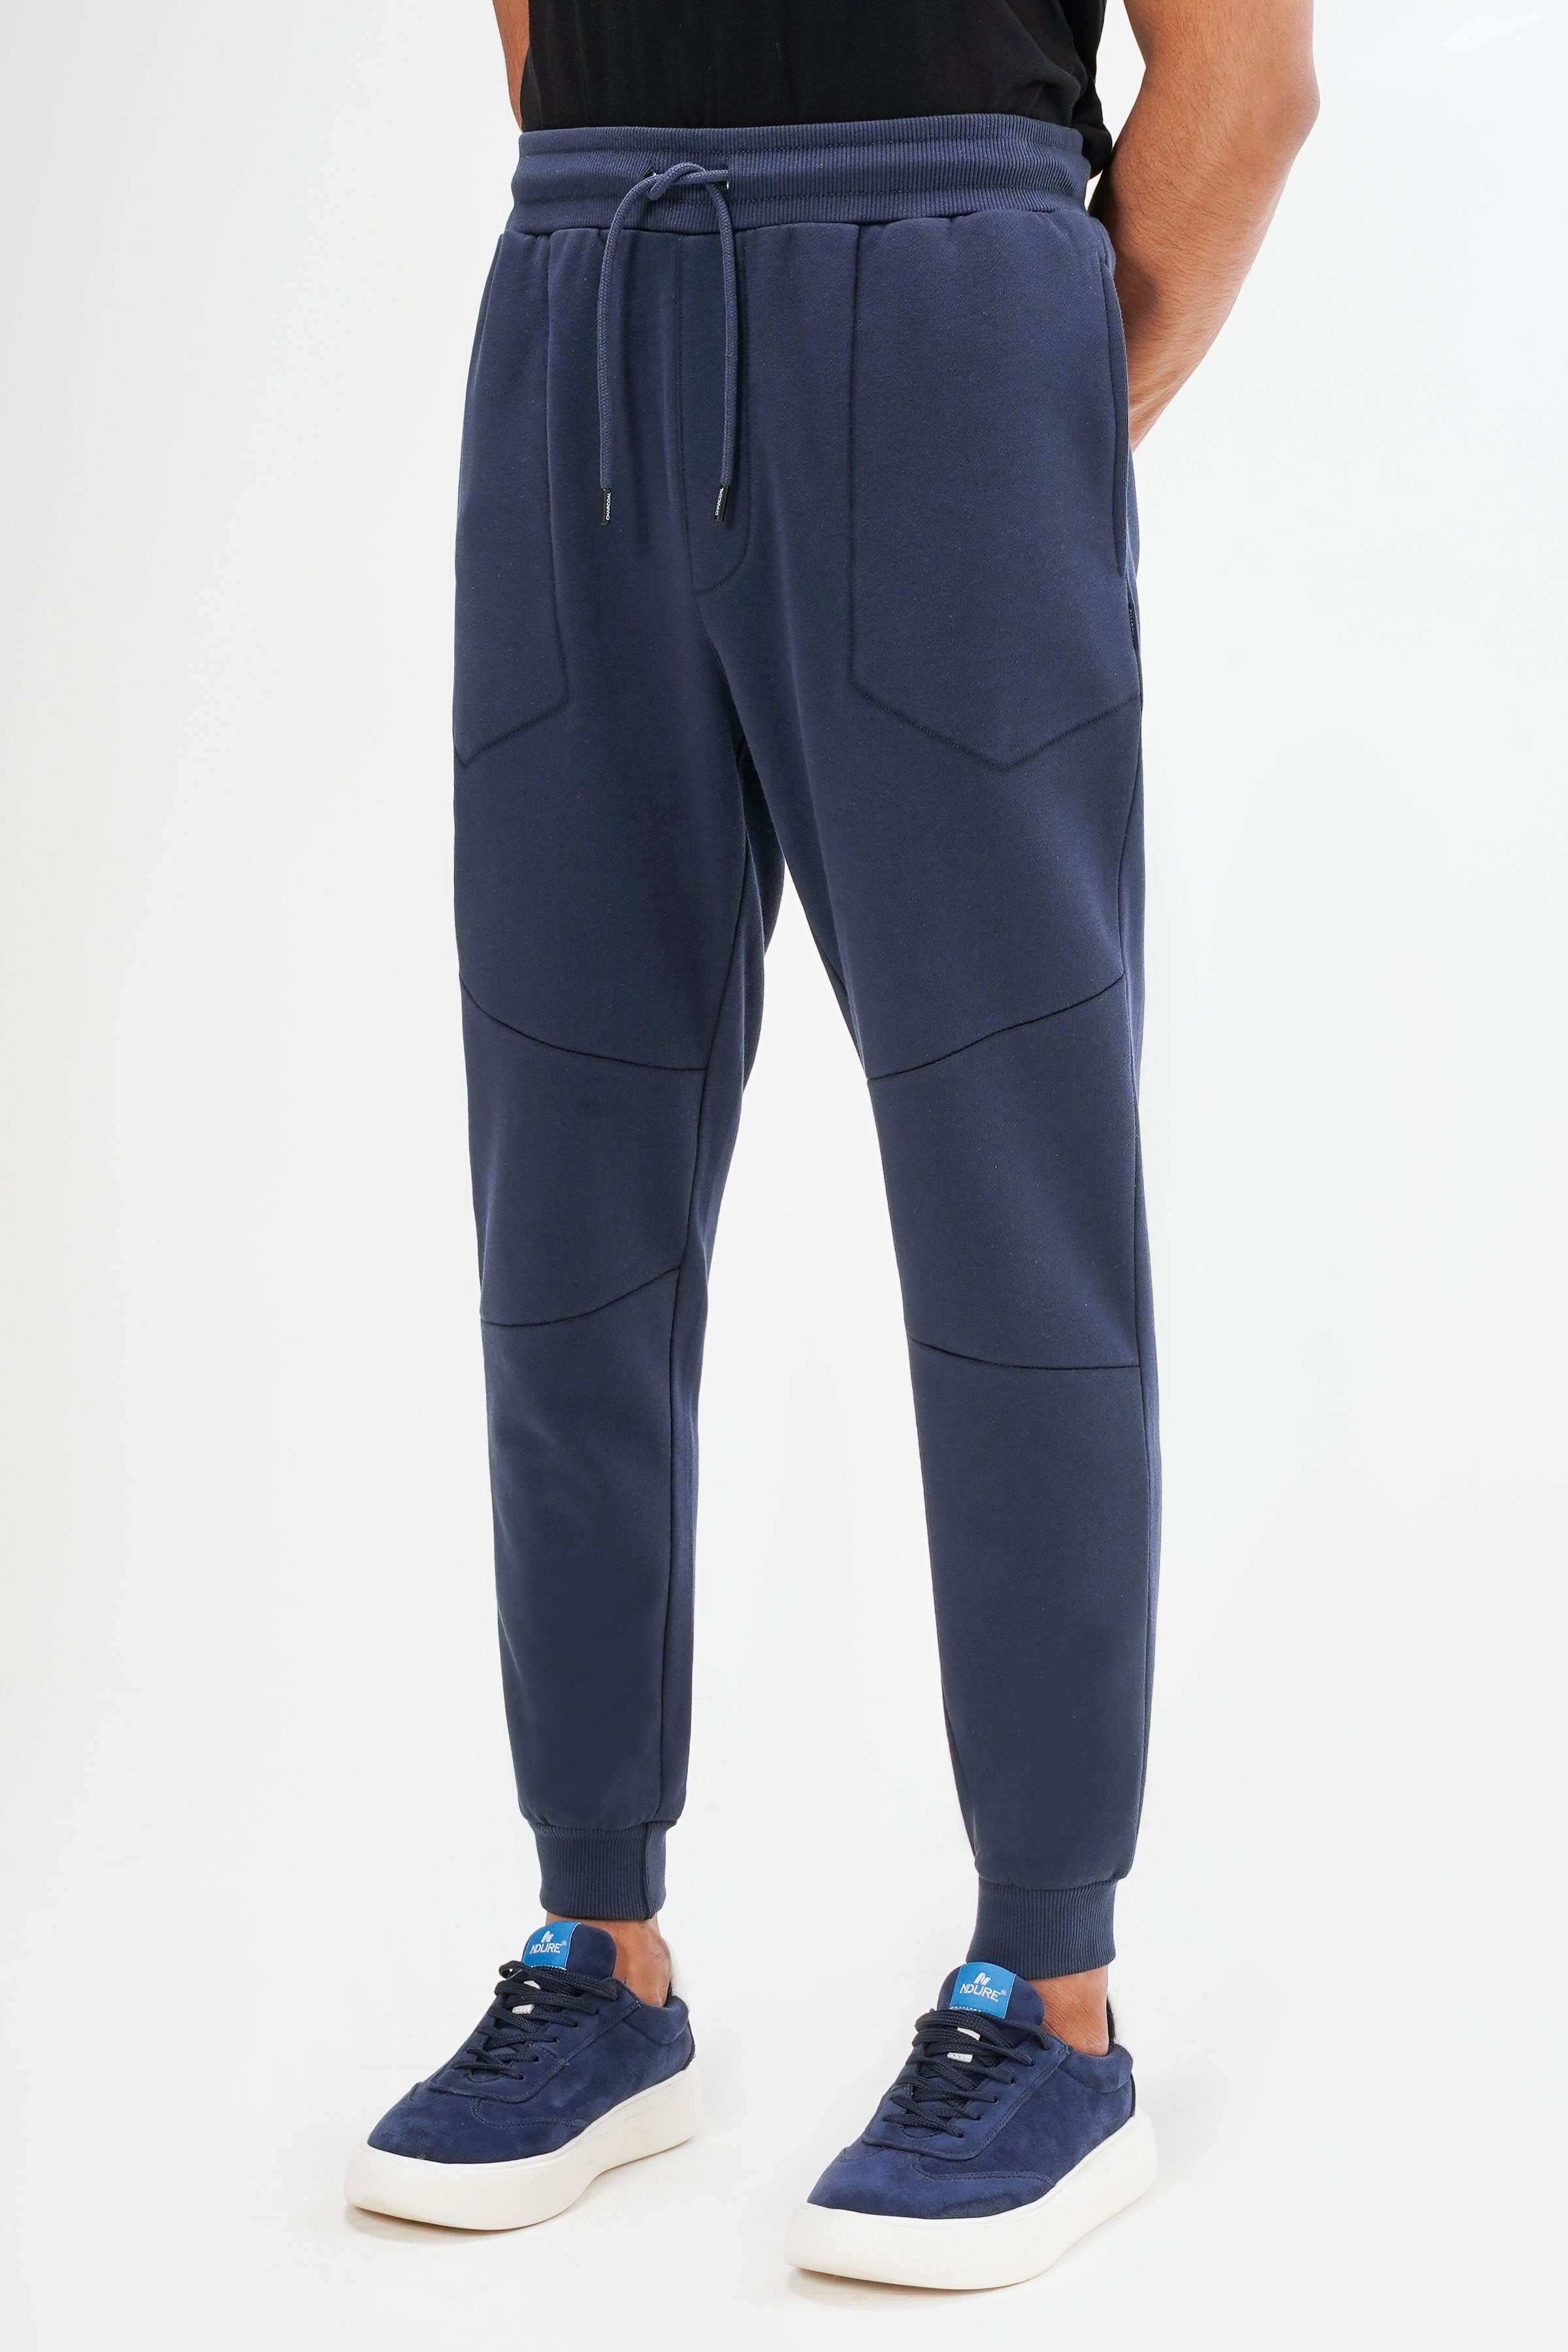 TERRY FLEECE JOGGER TROUSER NAVY at Charcoal Clothing